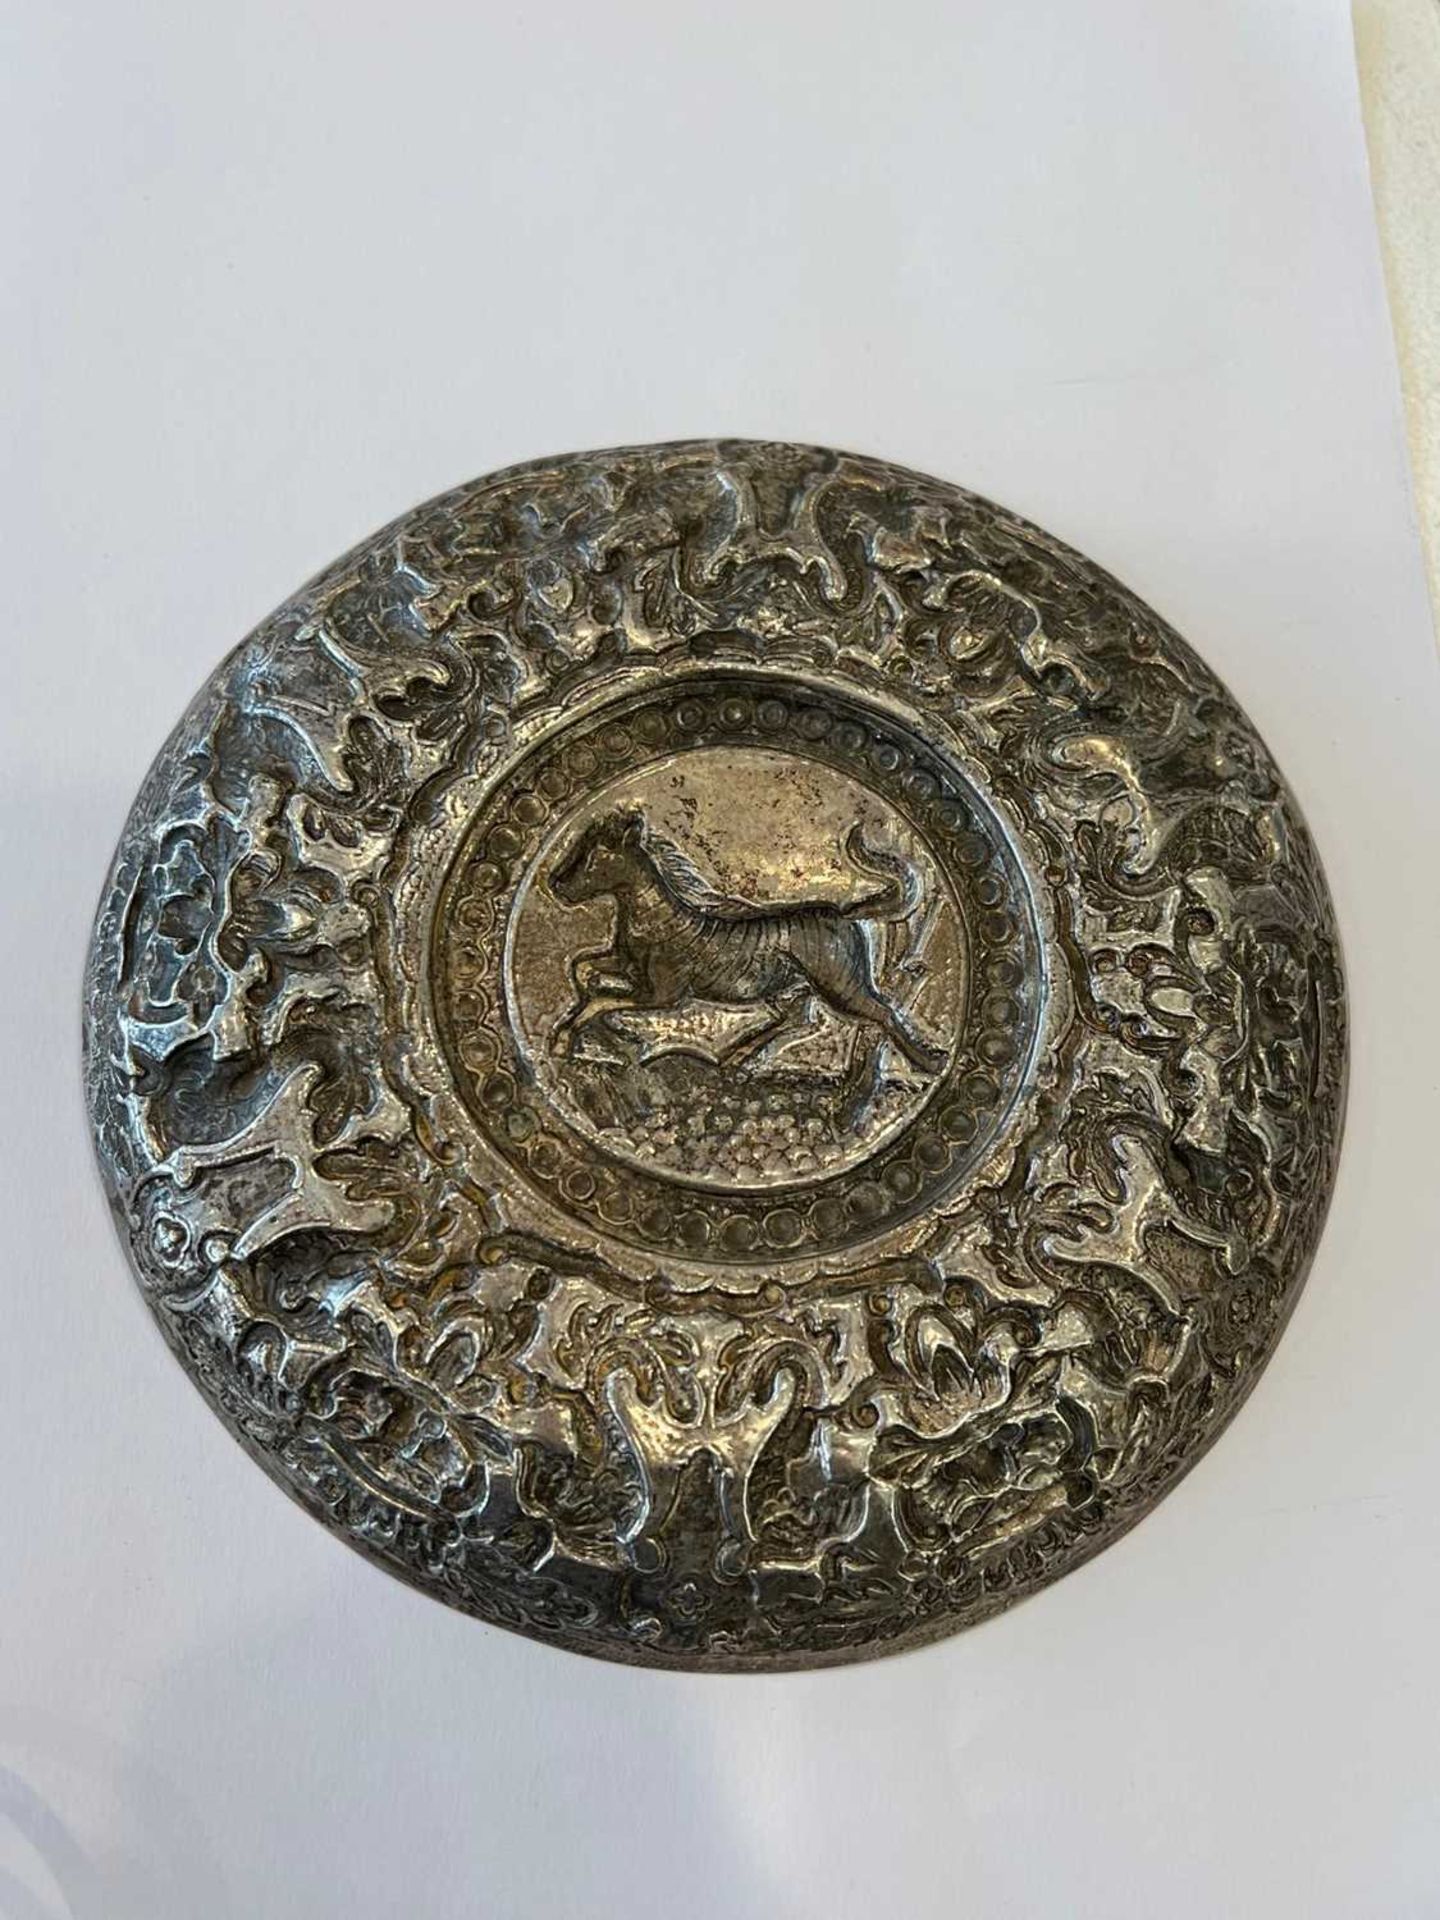 AN 18TH / EARLY 19TH CENTURY OTTOMAN (ARMENIAN) SILVER BOWL - Image 3 of 4